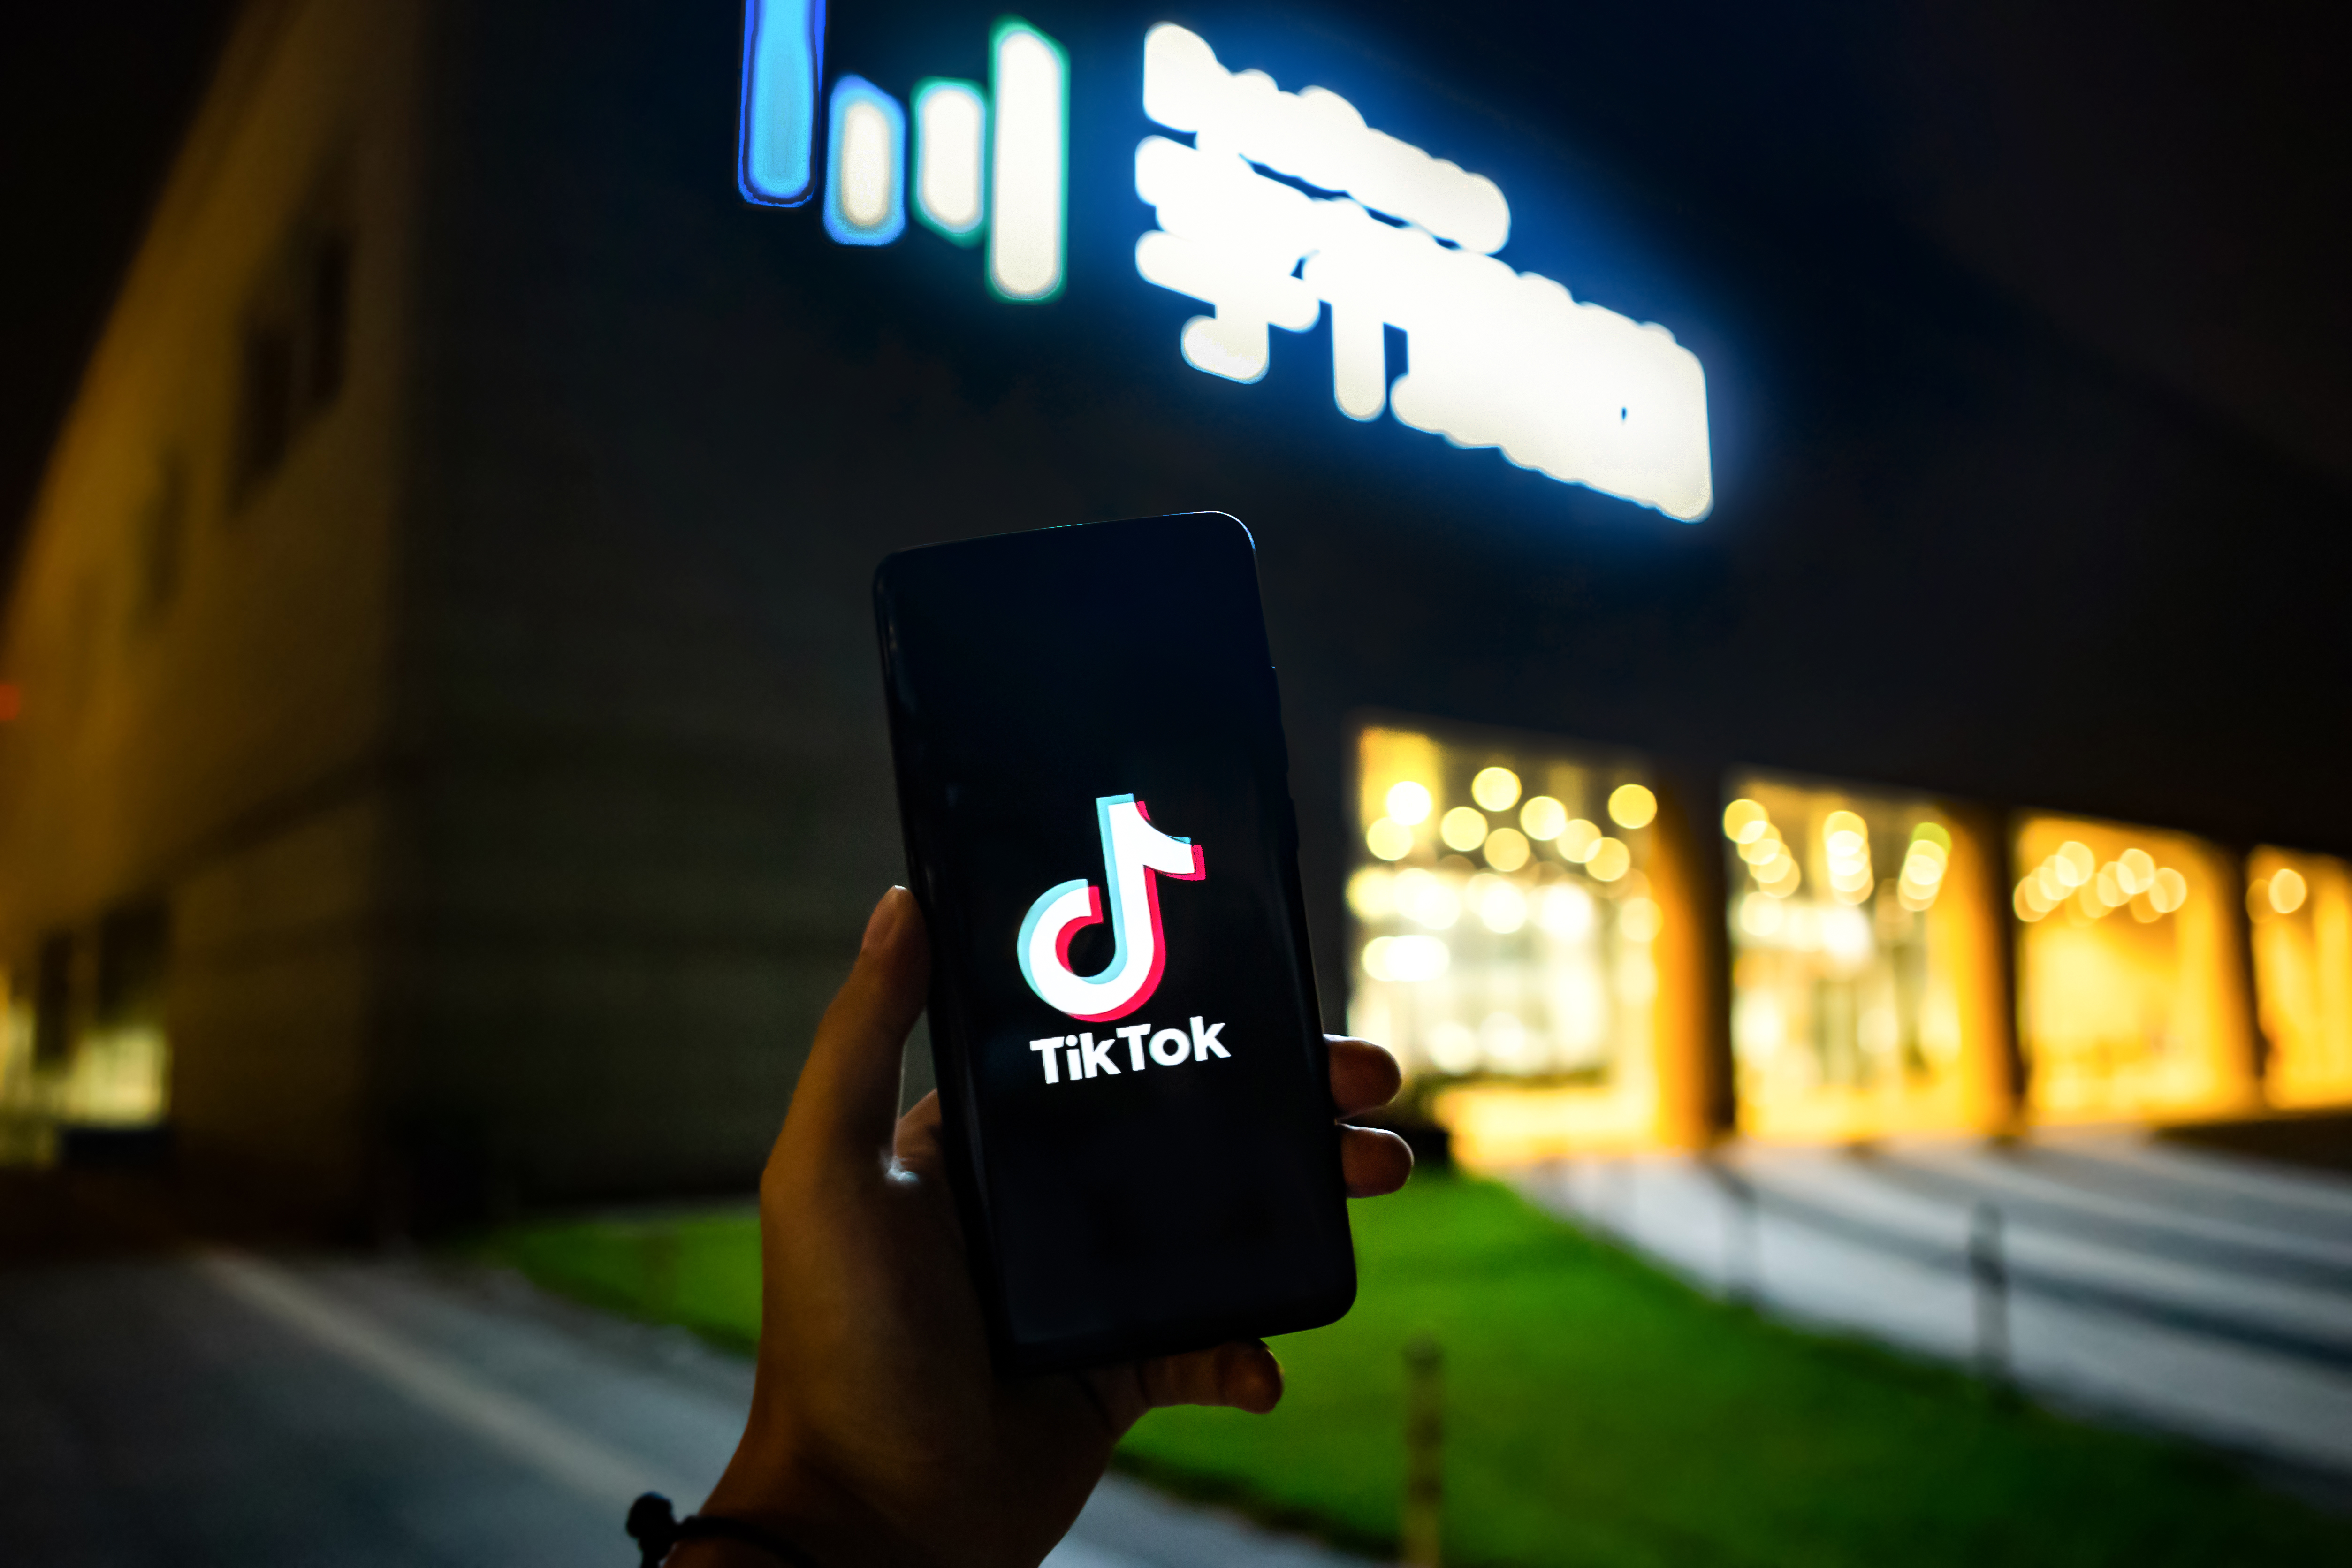 A hand holds up a phone displaying the TikTok logo in front of a building.